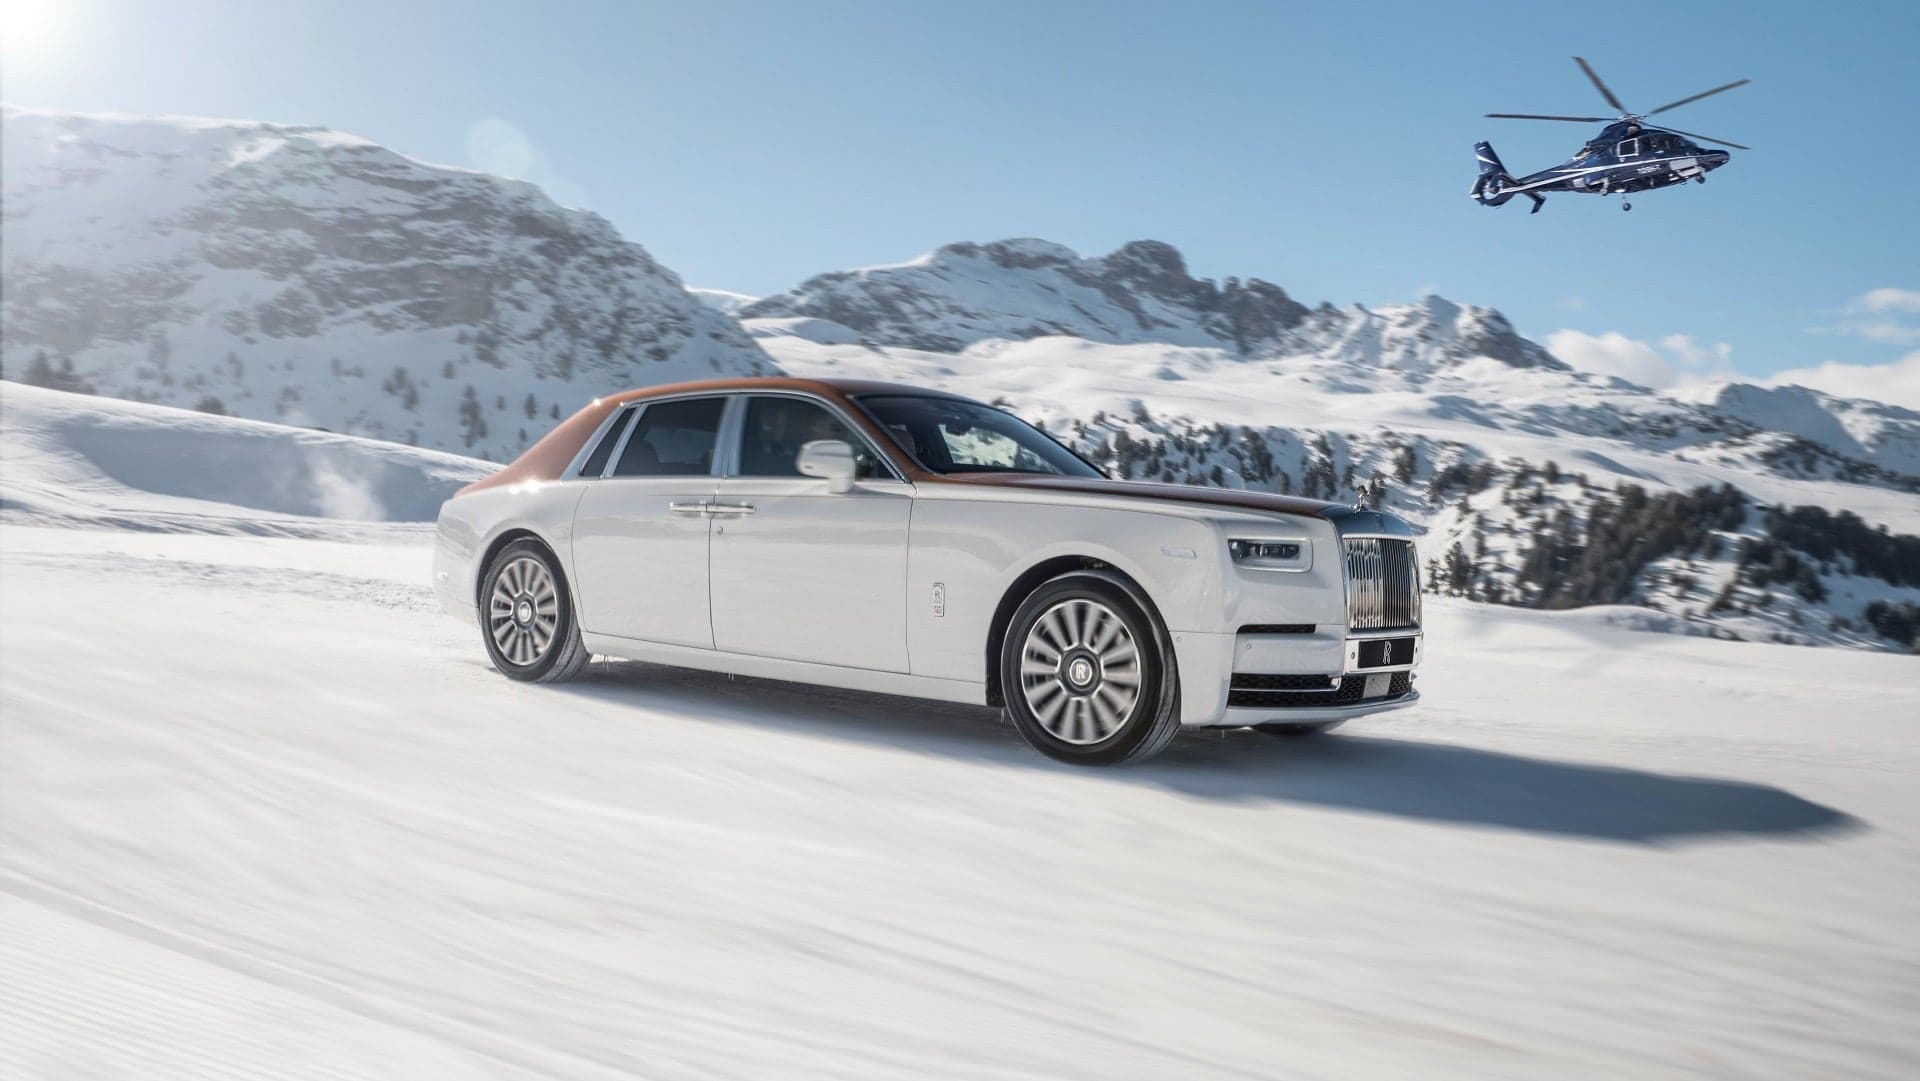 Over 90 Percent of Rolls-Royce Cars Sold Are so Customized They’re Practically One-Offs